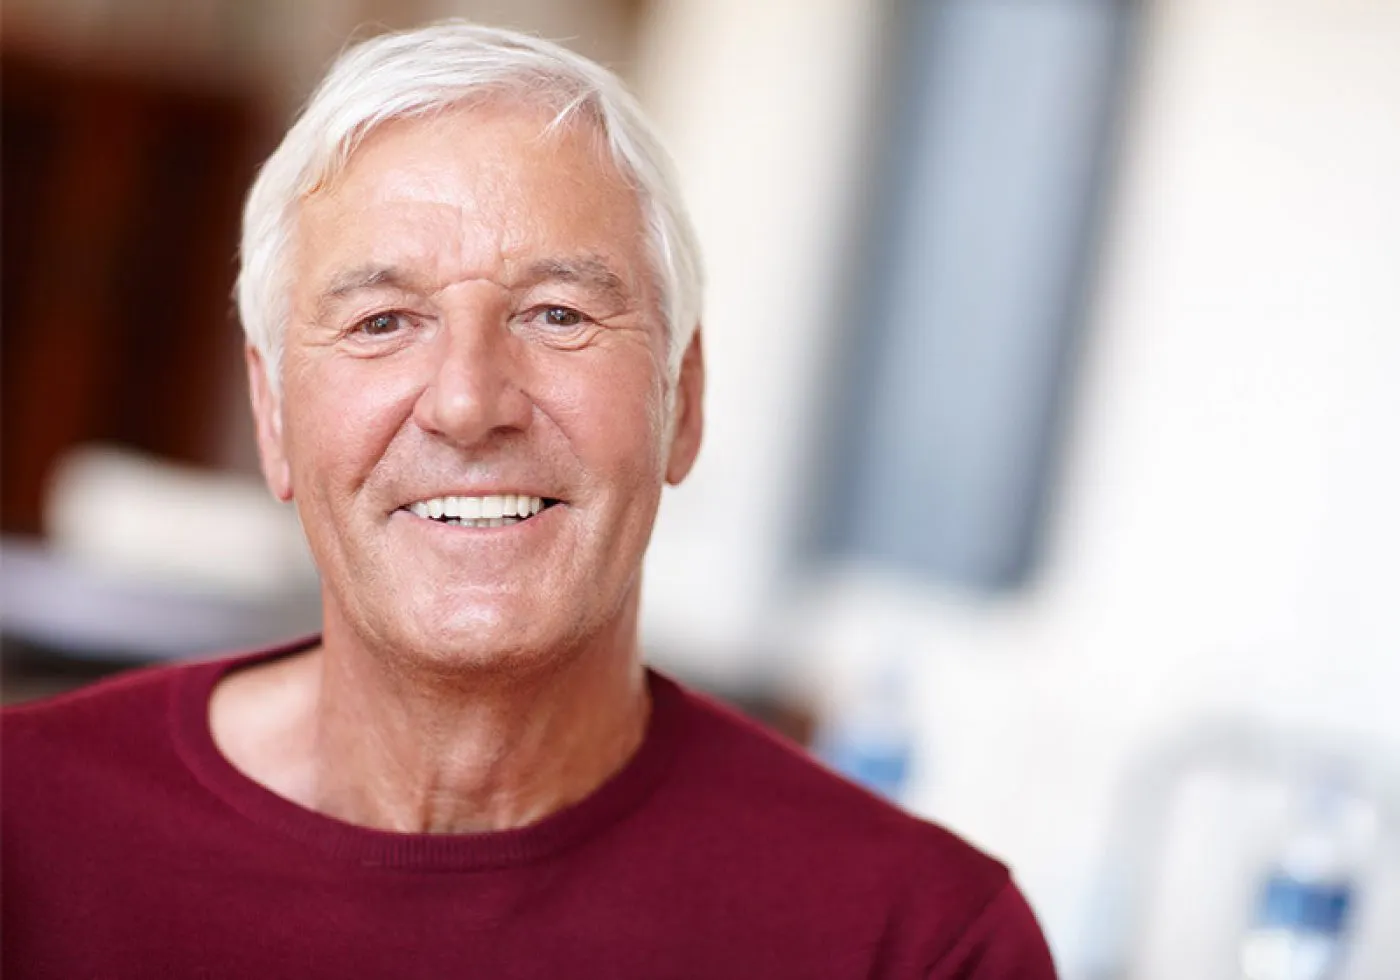 Man With Implant Secured Dentures